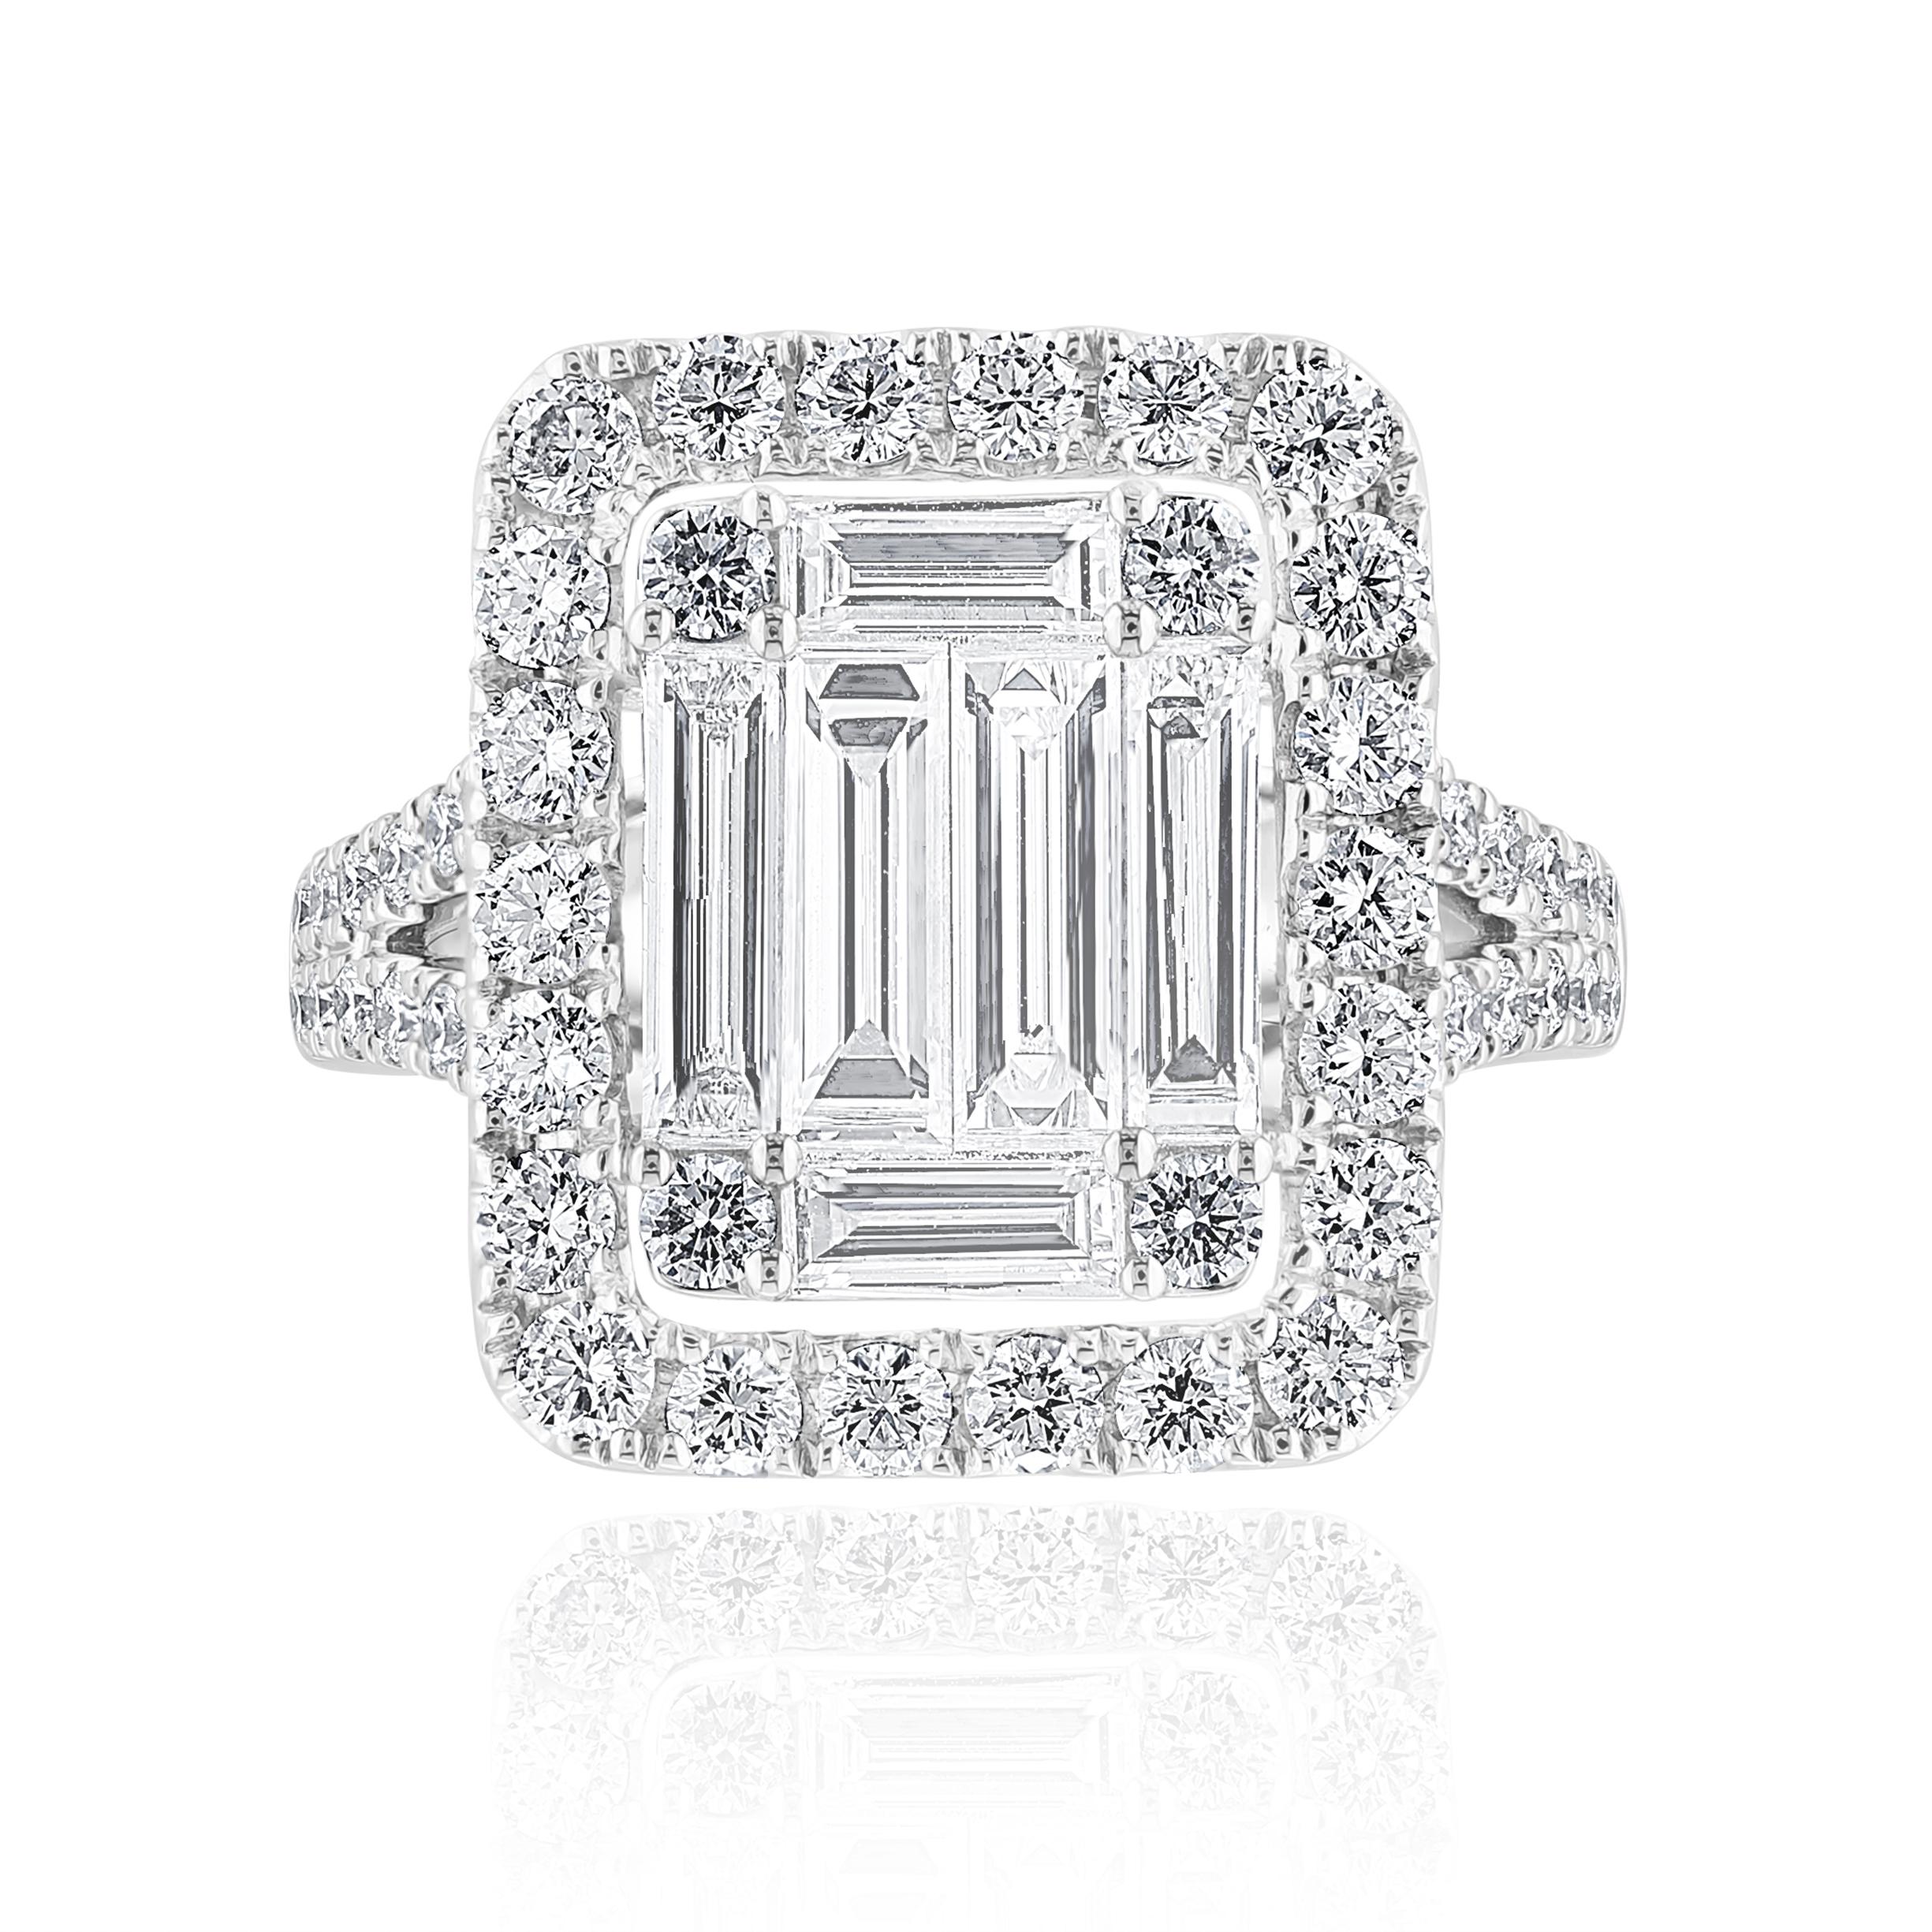 A brilliant and unique piece featuring a cluster of baguette diamonds shaped like an emerald cut, surrounded by a single row of round brilliant diamonds with a split shank. 6 Baguette diamonds weigh 1.36 carats total; round diamonds weigh 1.29